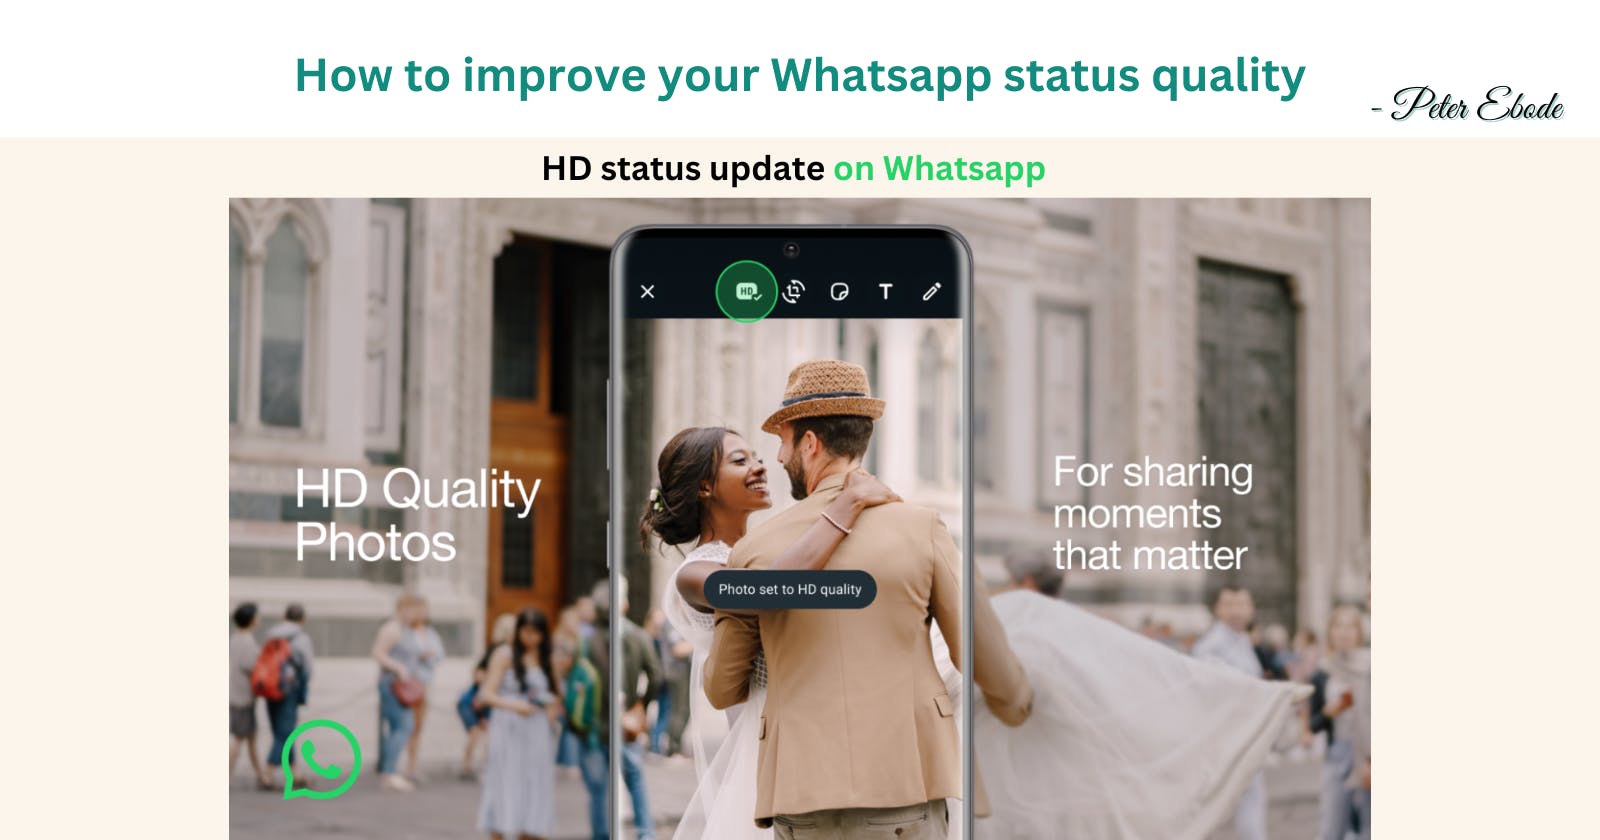 How to improve your whatsapp status quality